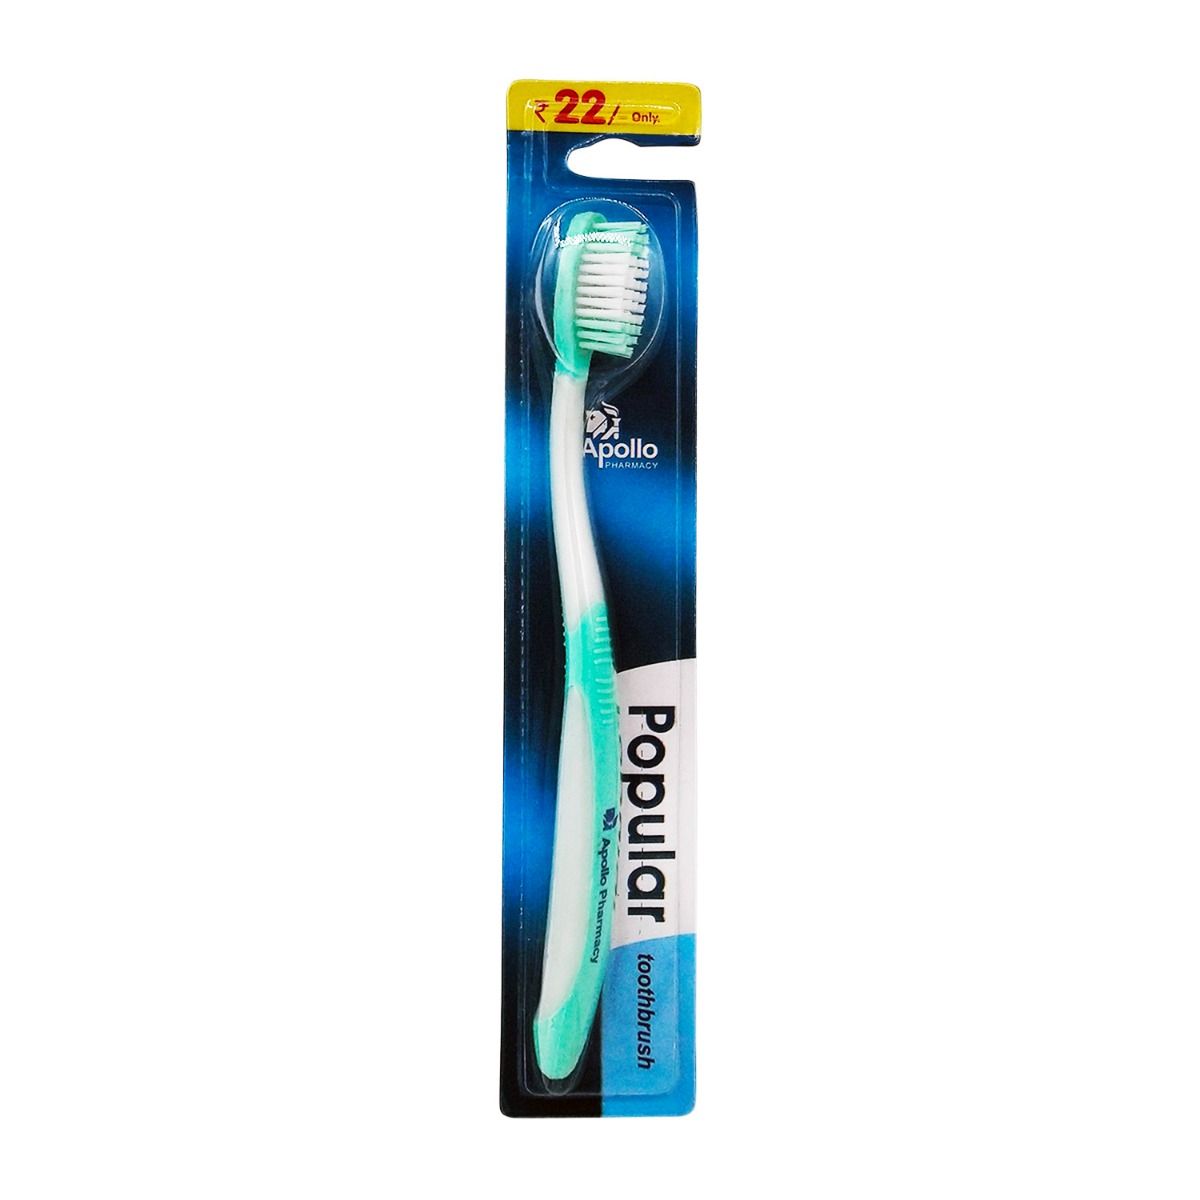 Apollo Pharmacy Popular Toothbrush, 1 Count, Pack of 1 